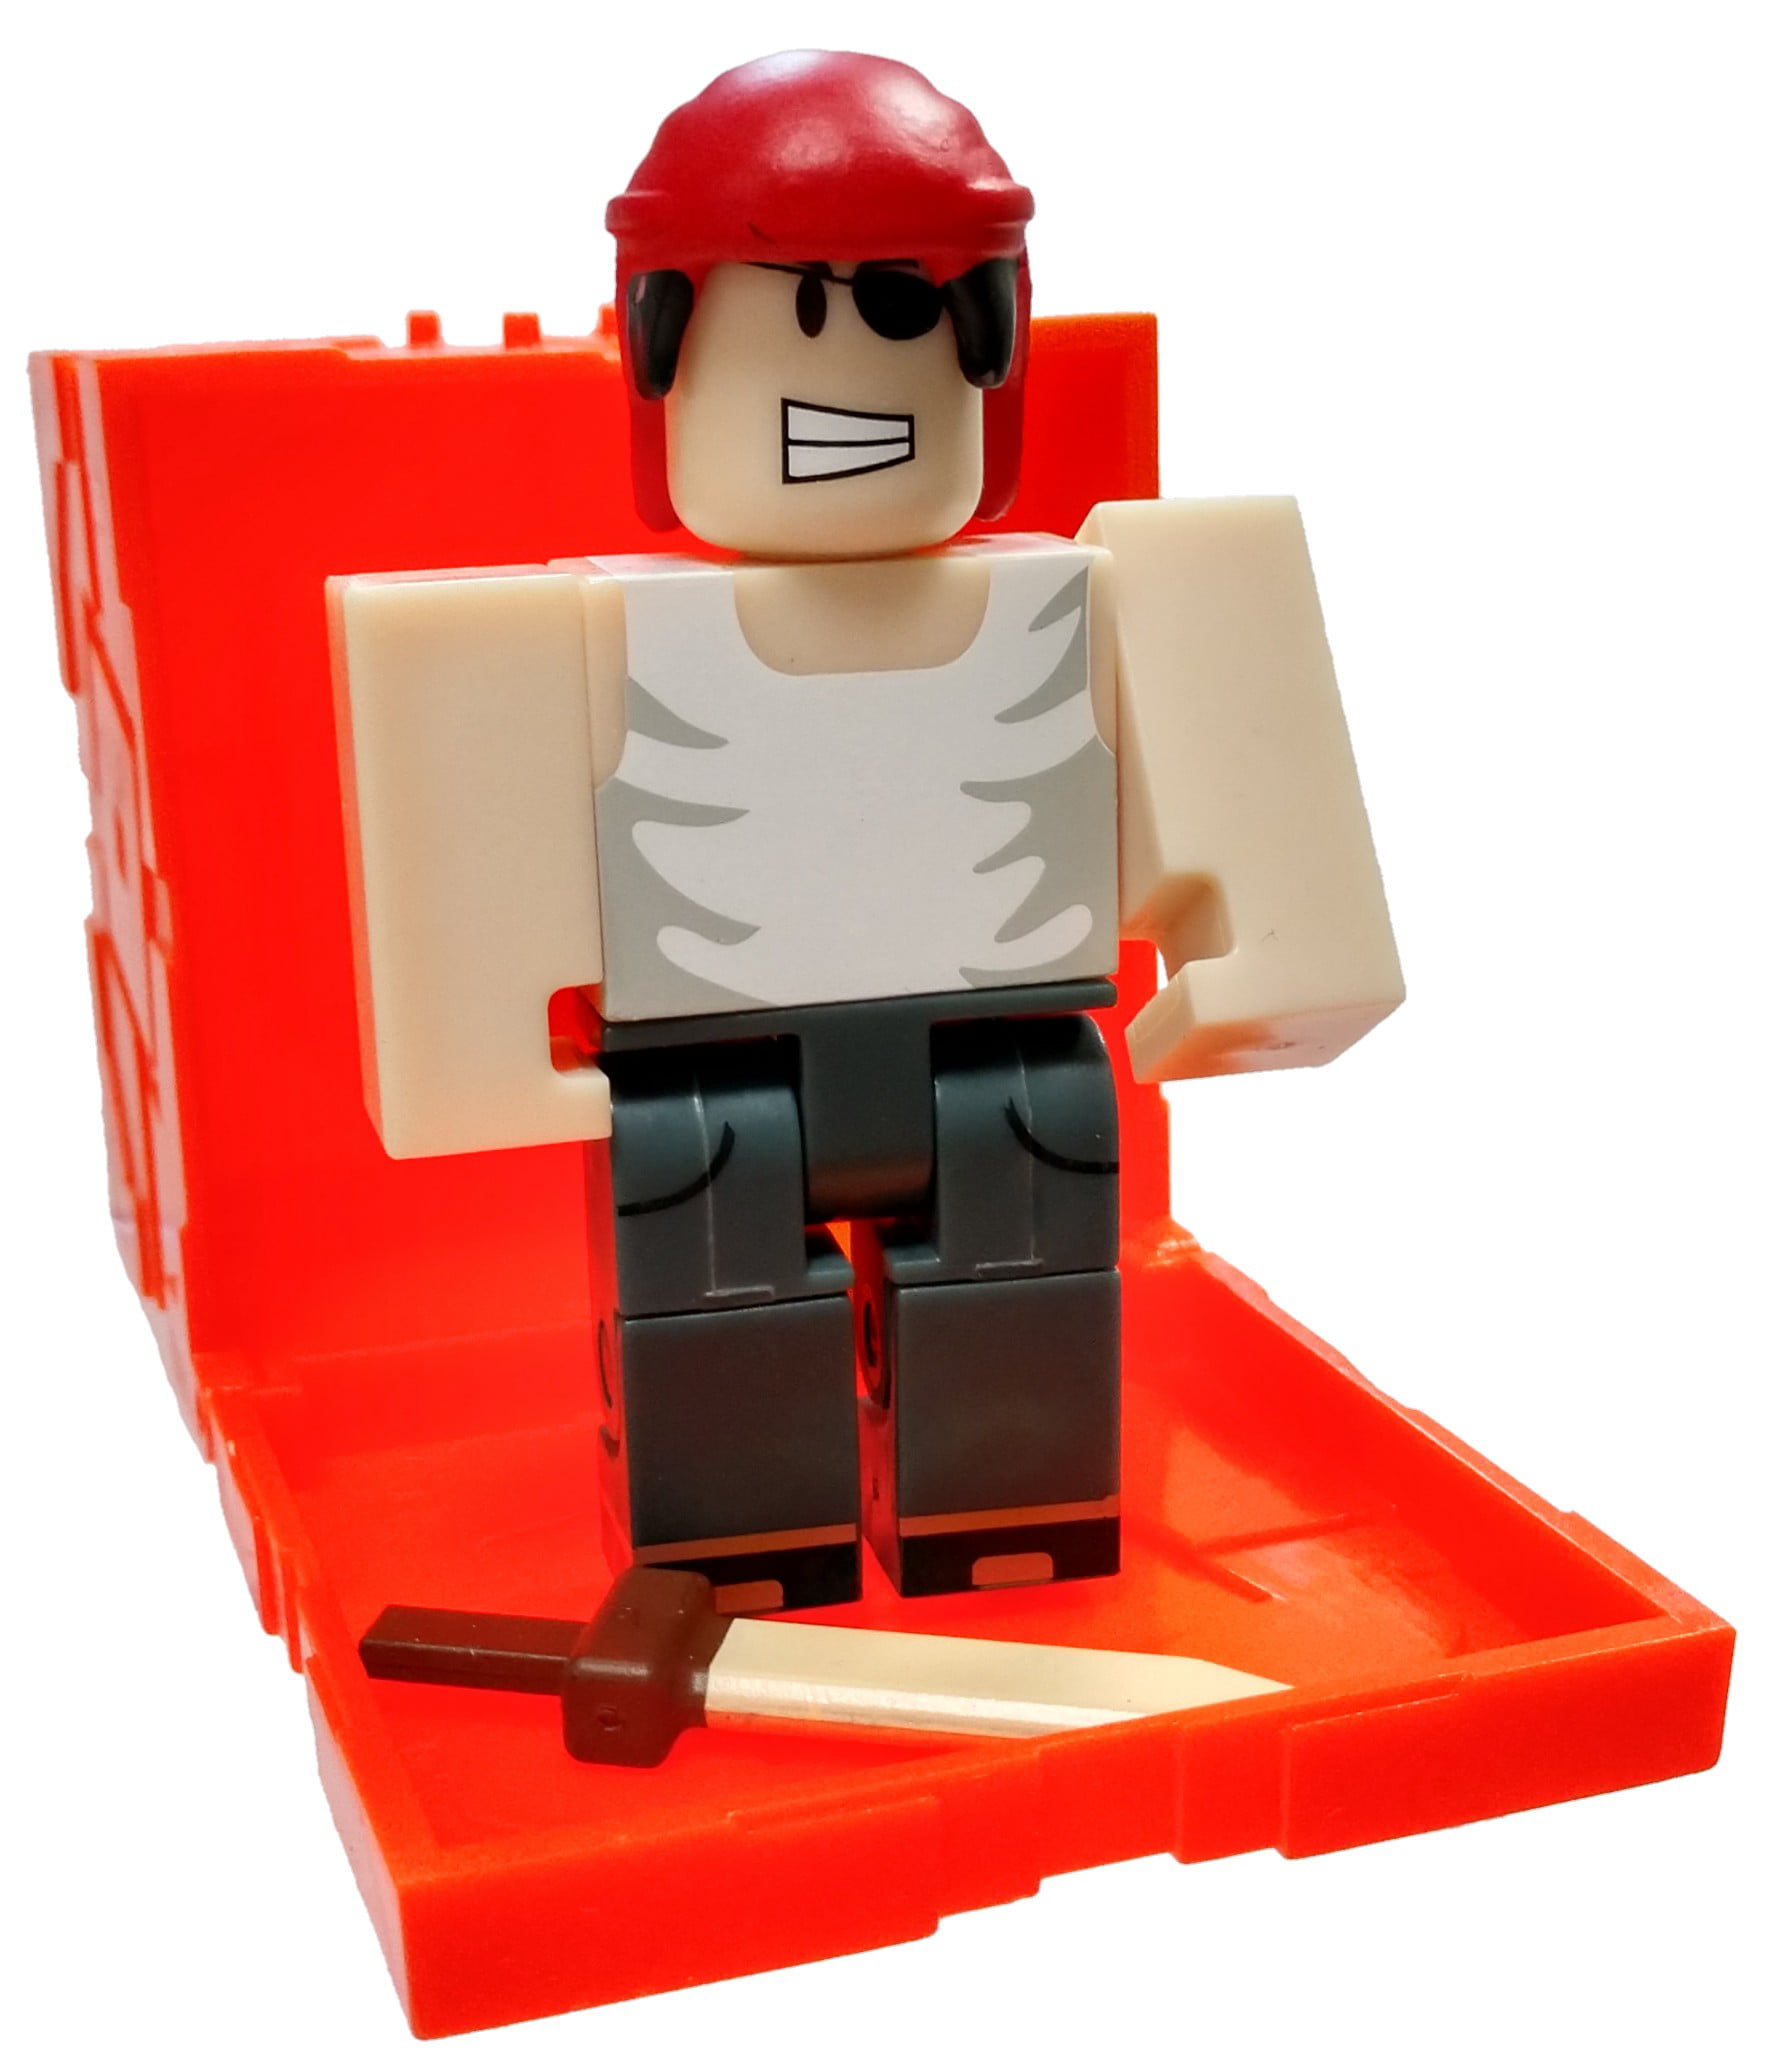 Roblox Series 6 Pirate Simulator Crew Mini Figure With Orange Cube And Online Code No Packaging Walmart Com Walmart Com - exercise simulator roblox